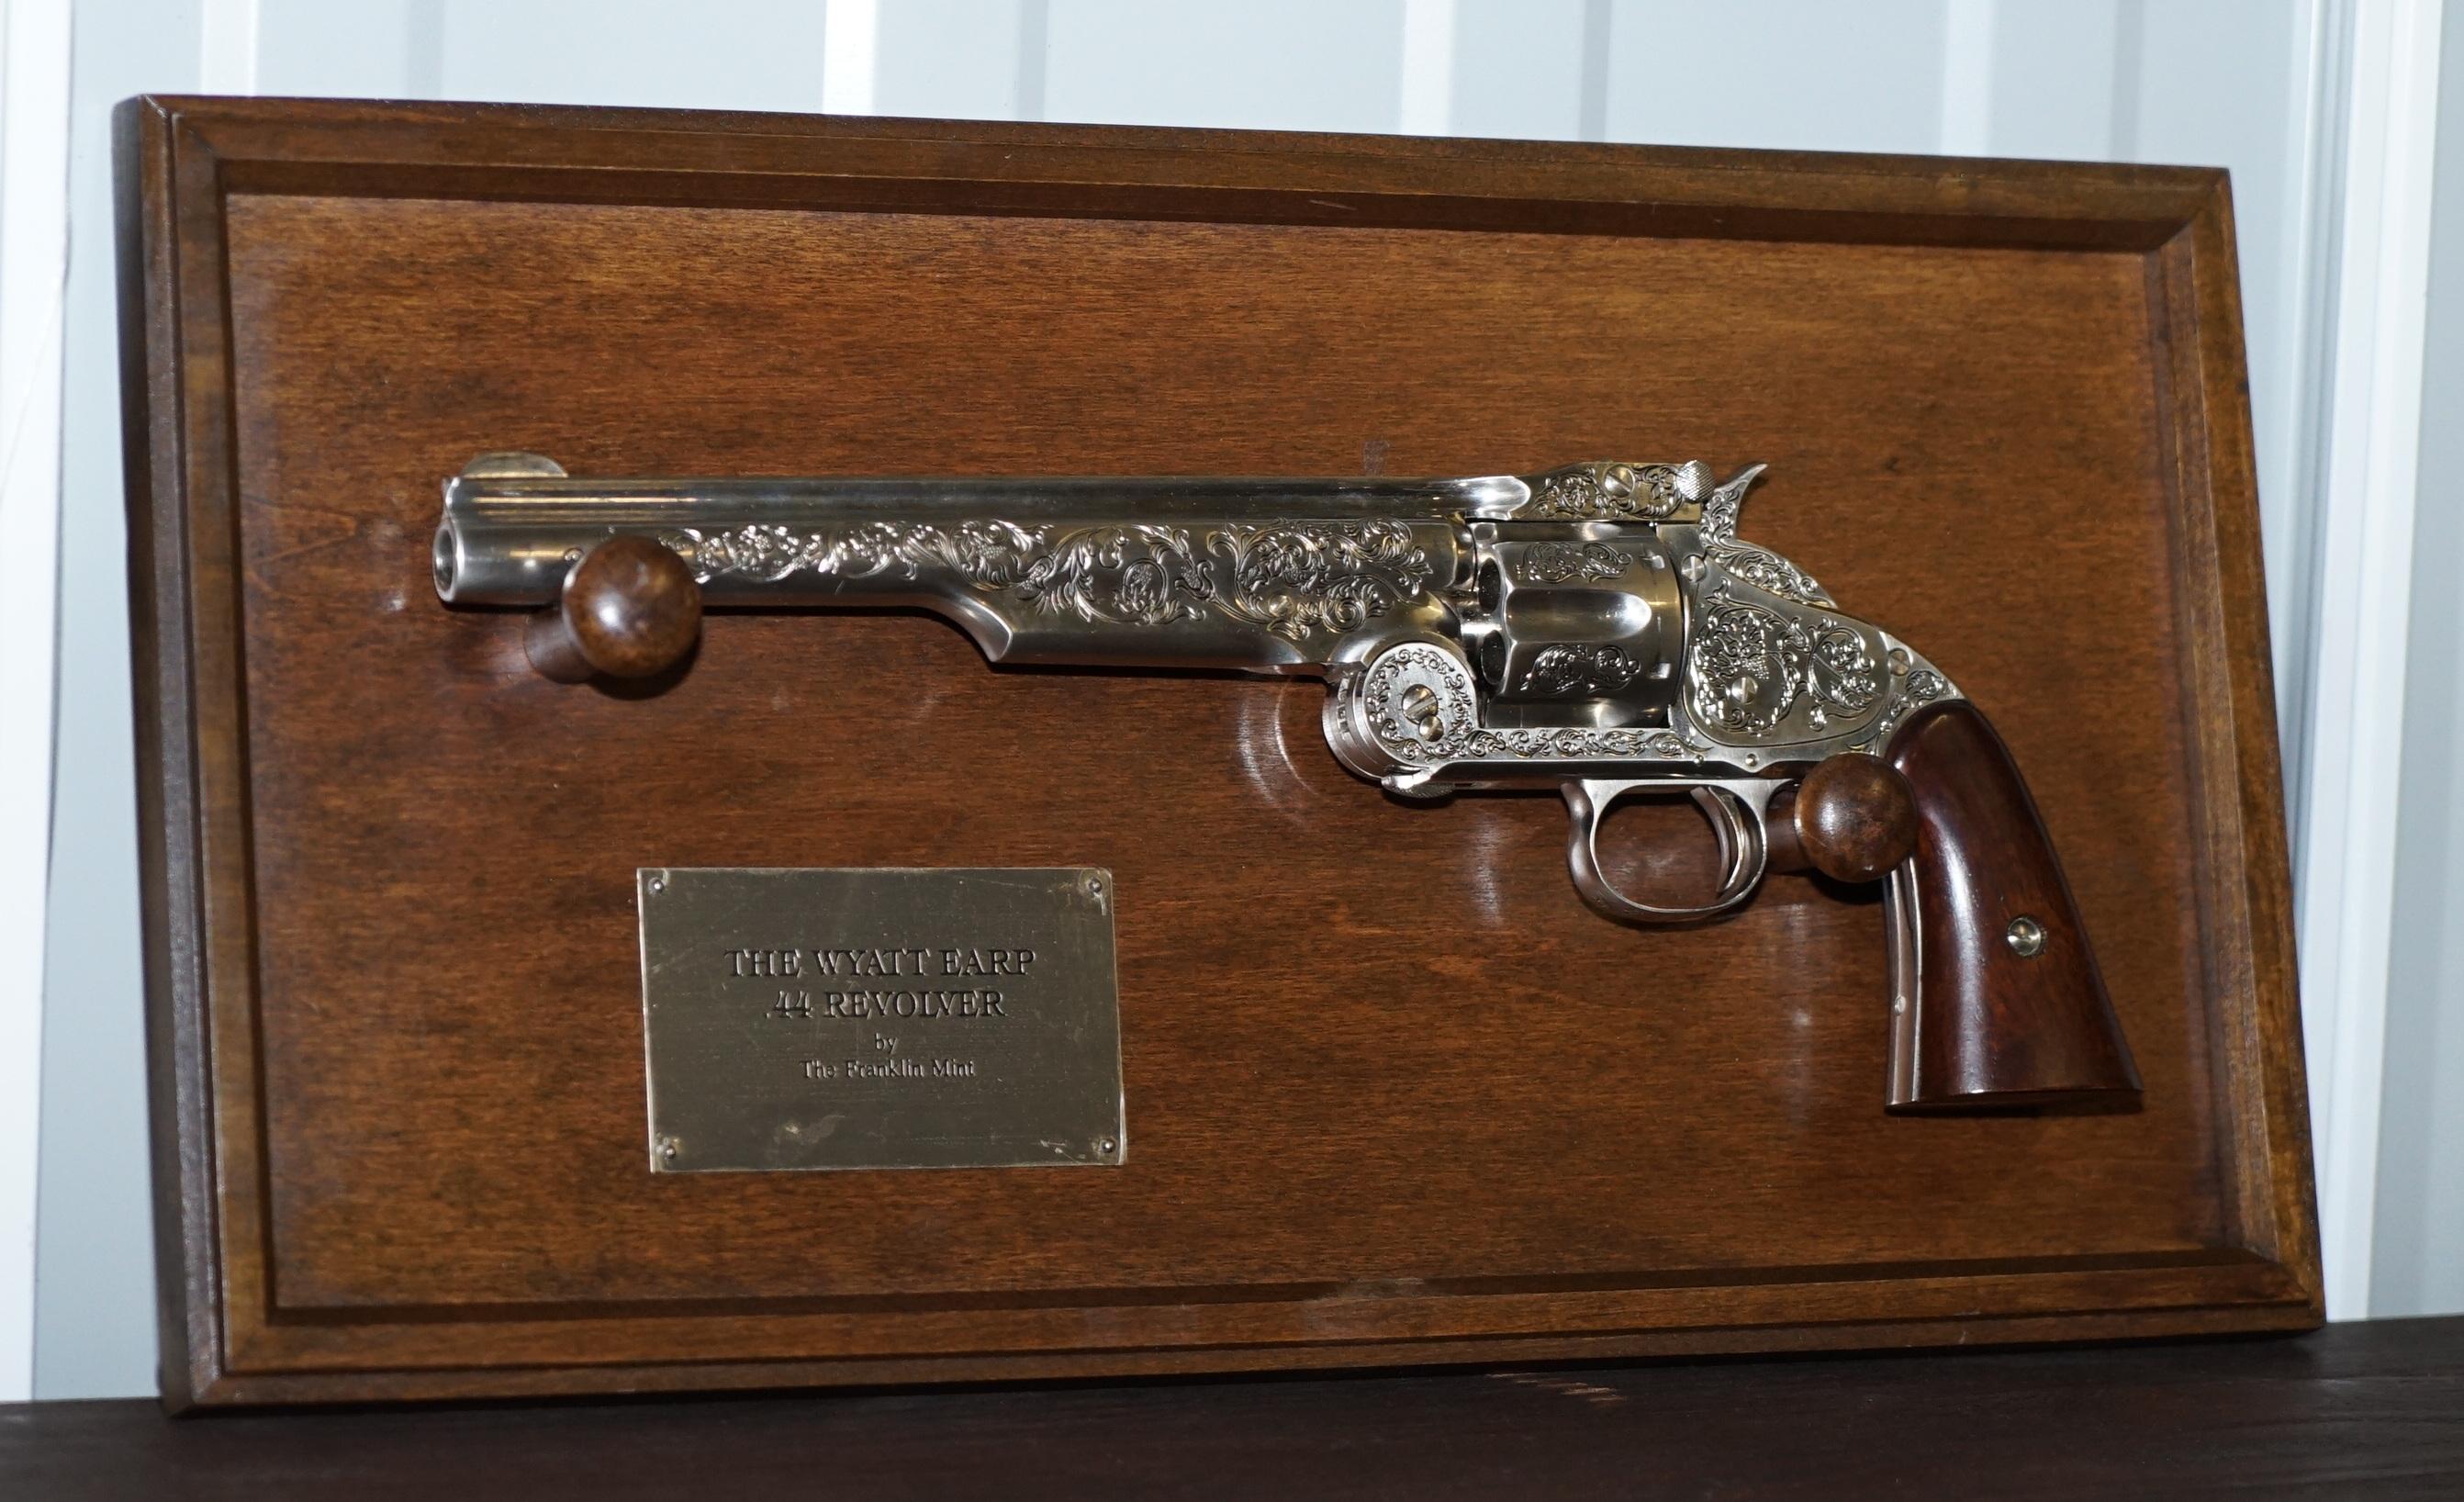 Wimbledon-Furniture

Wimbledon-Furniture is delighted to offer for sale this lovely wall mounted and boxed with all original documentation display only replica of the .44 Revolver used by Wyatt Erpe at the O.K Corral 

Please note the delivery